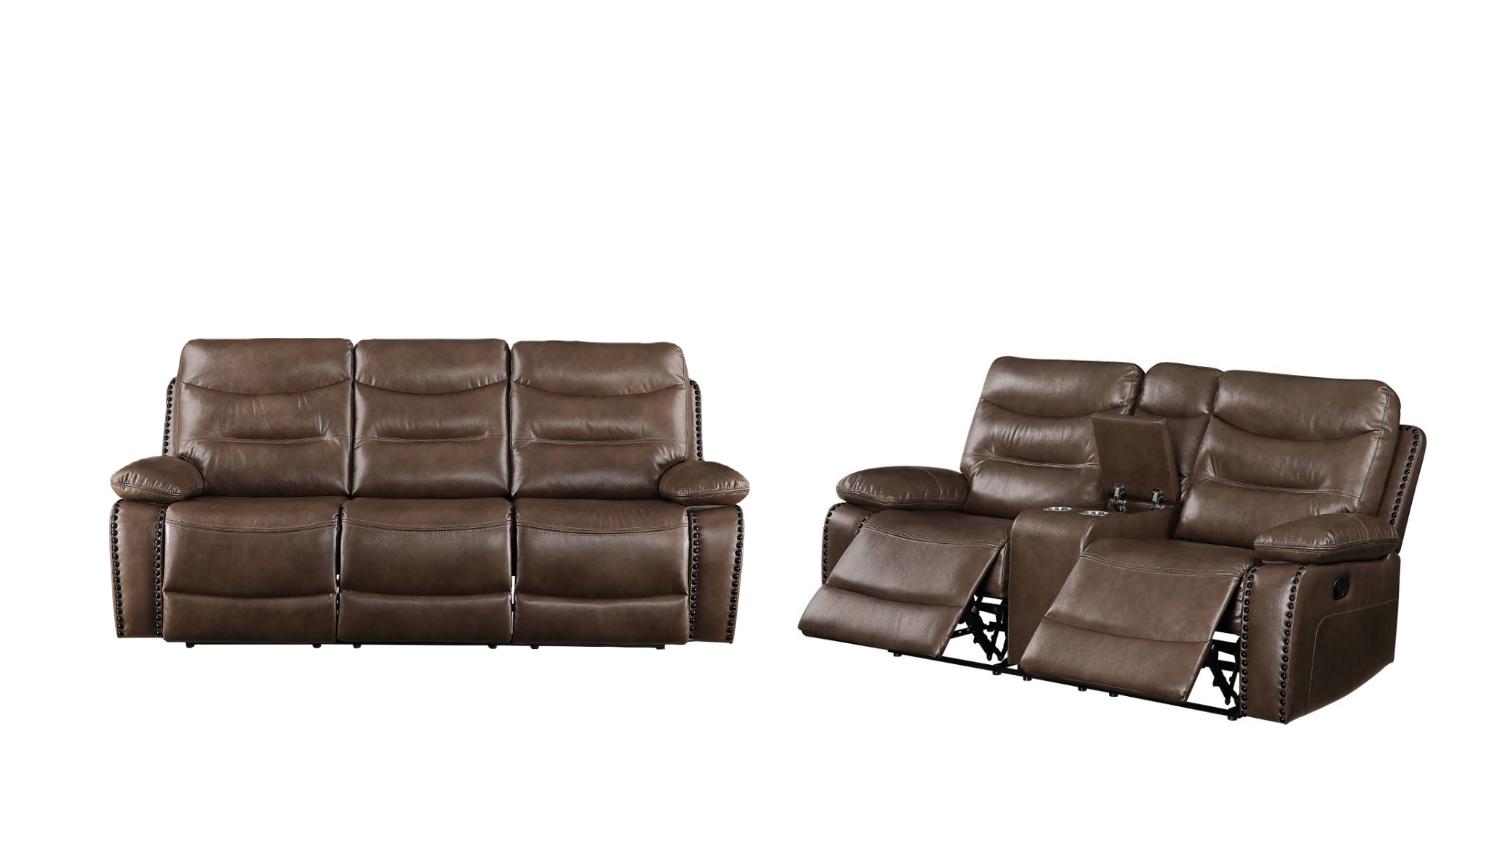 Contemporary Sofa and Loveseat Set Aashi 55420-2pcs in Brown 